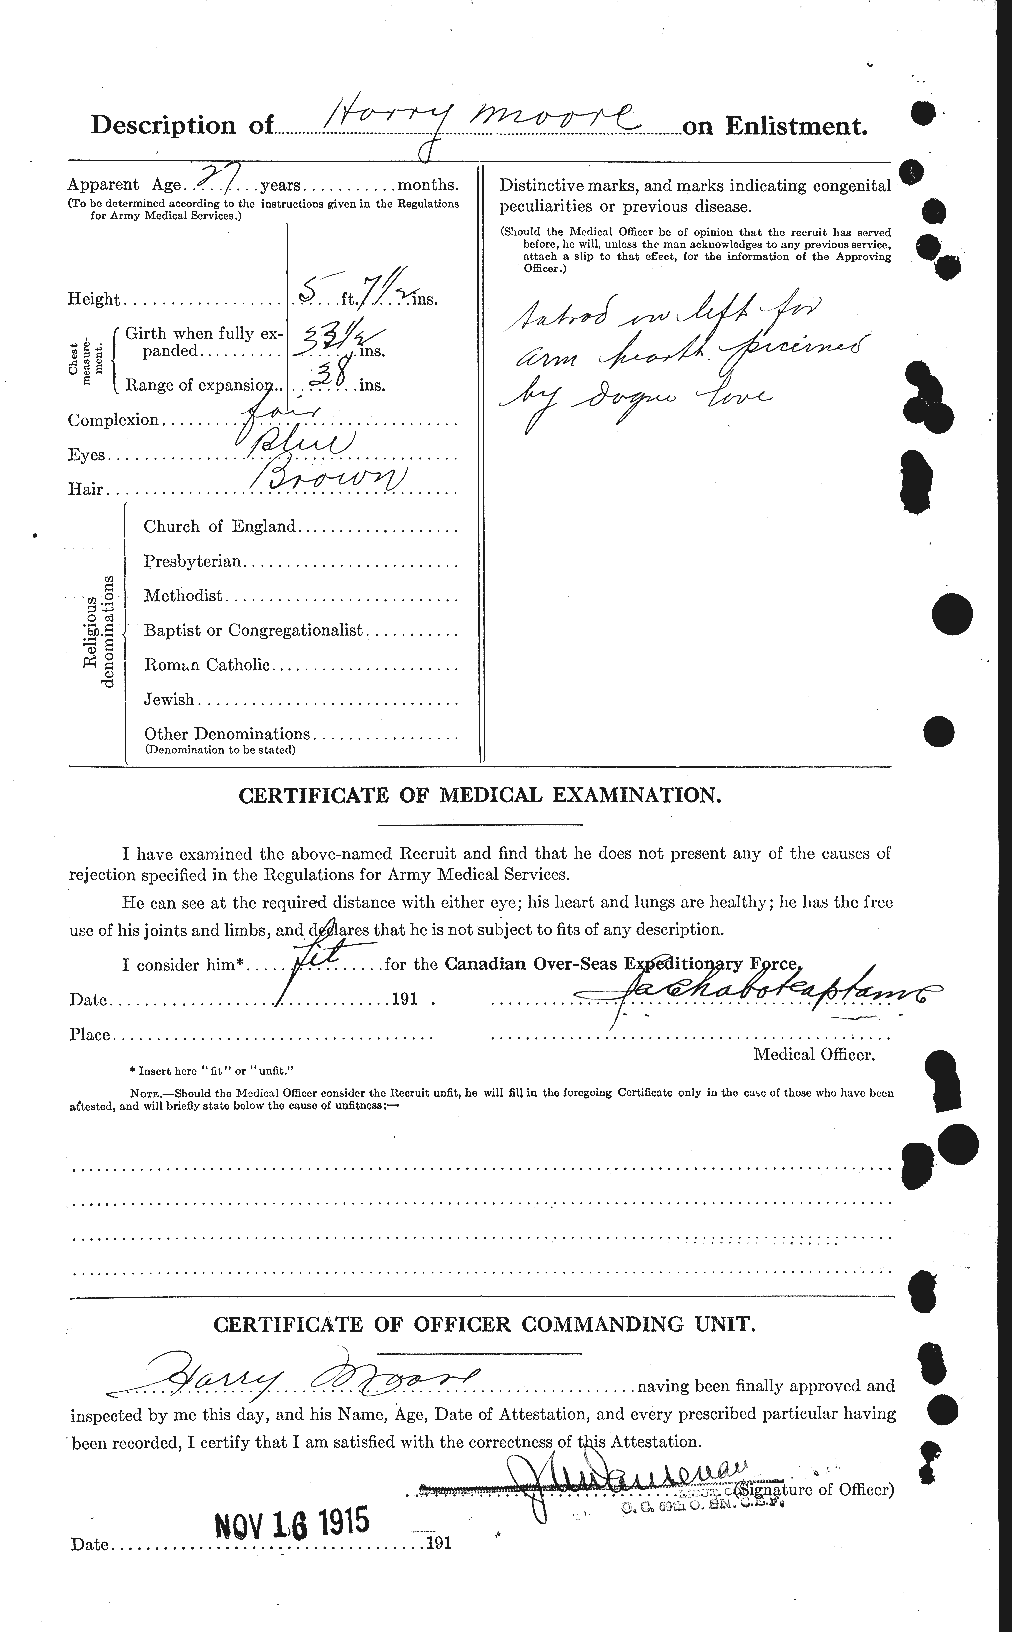 Personnel Records of the First World War - CEF 502078b